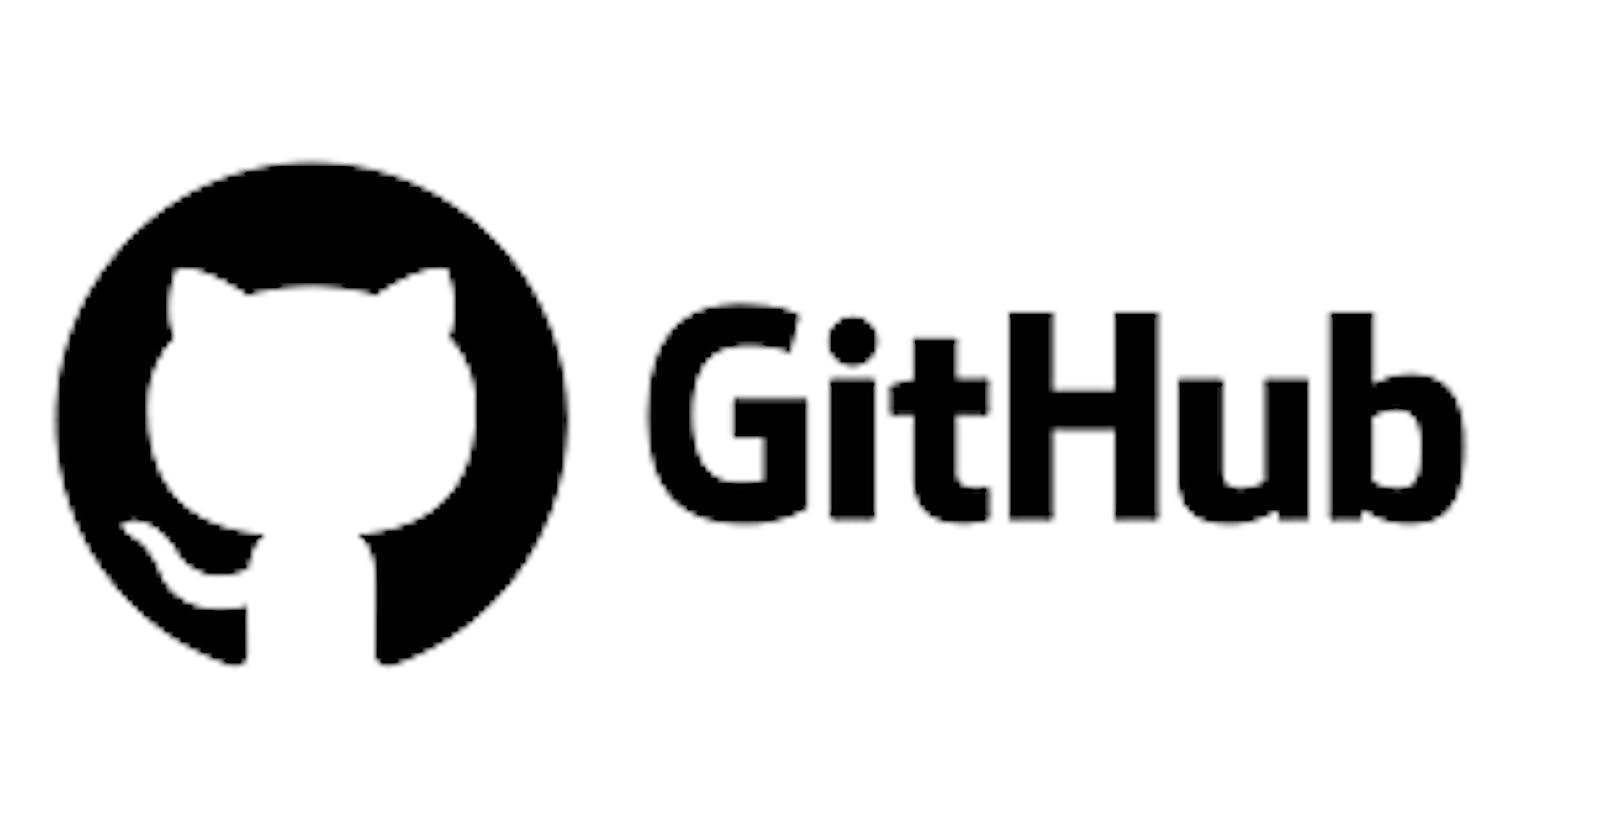 Steps to push your local Git repository to a remote GitHub repository